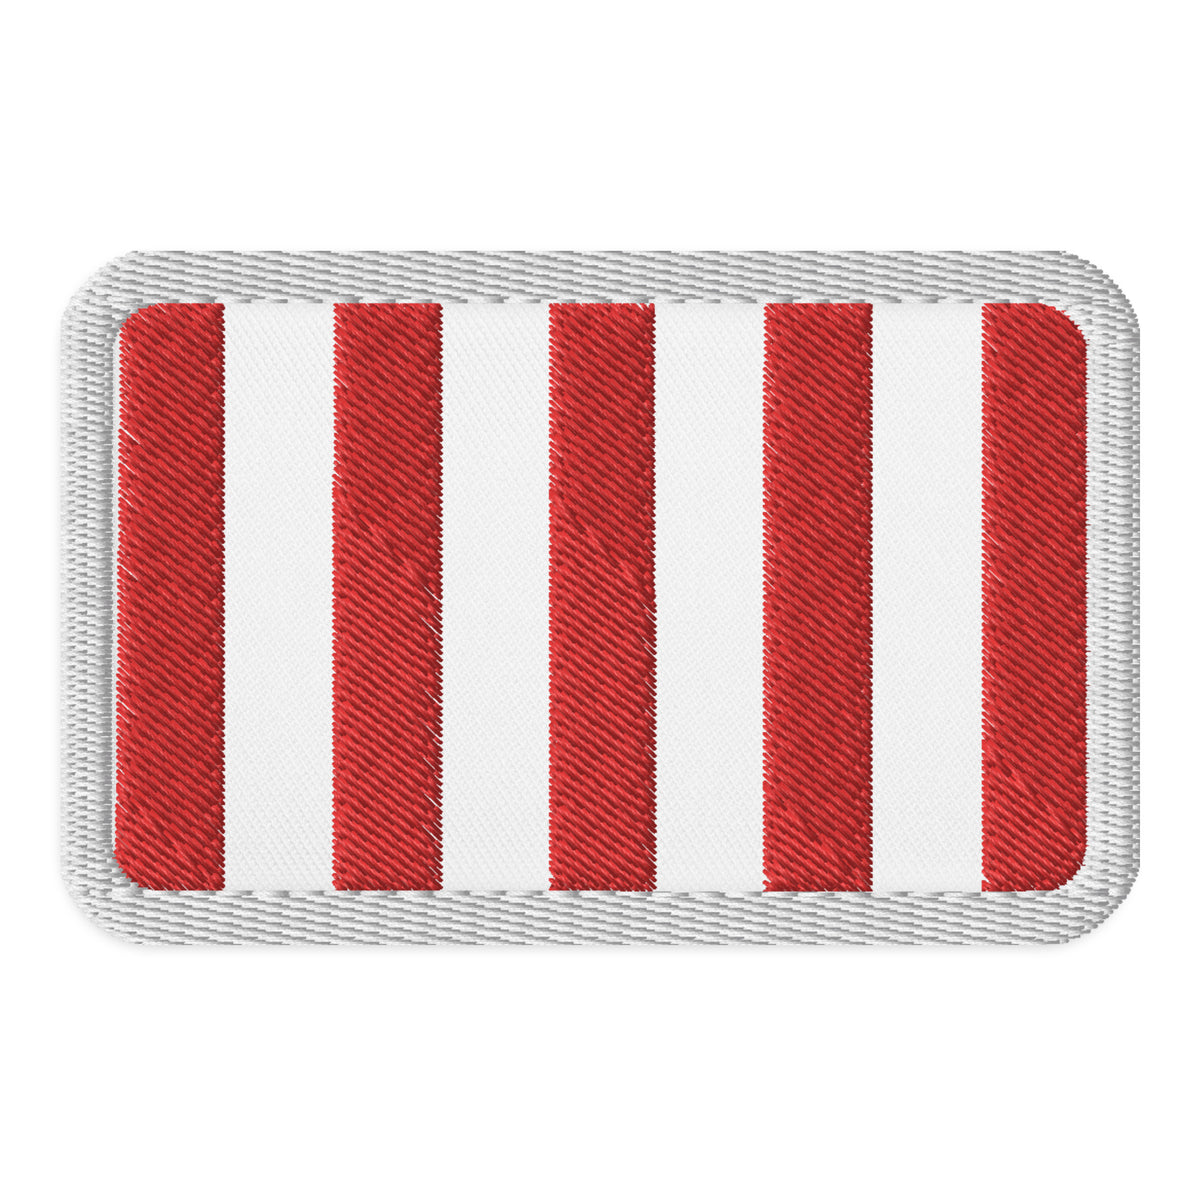 Sons of Liberty Vertical Rebel Stripes Morale Patch